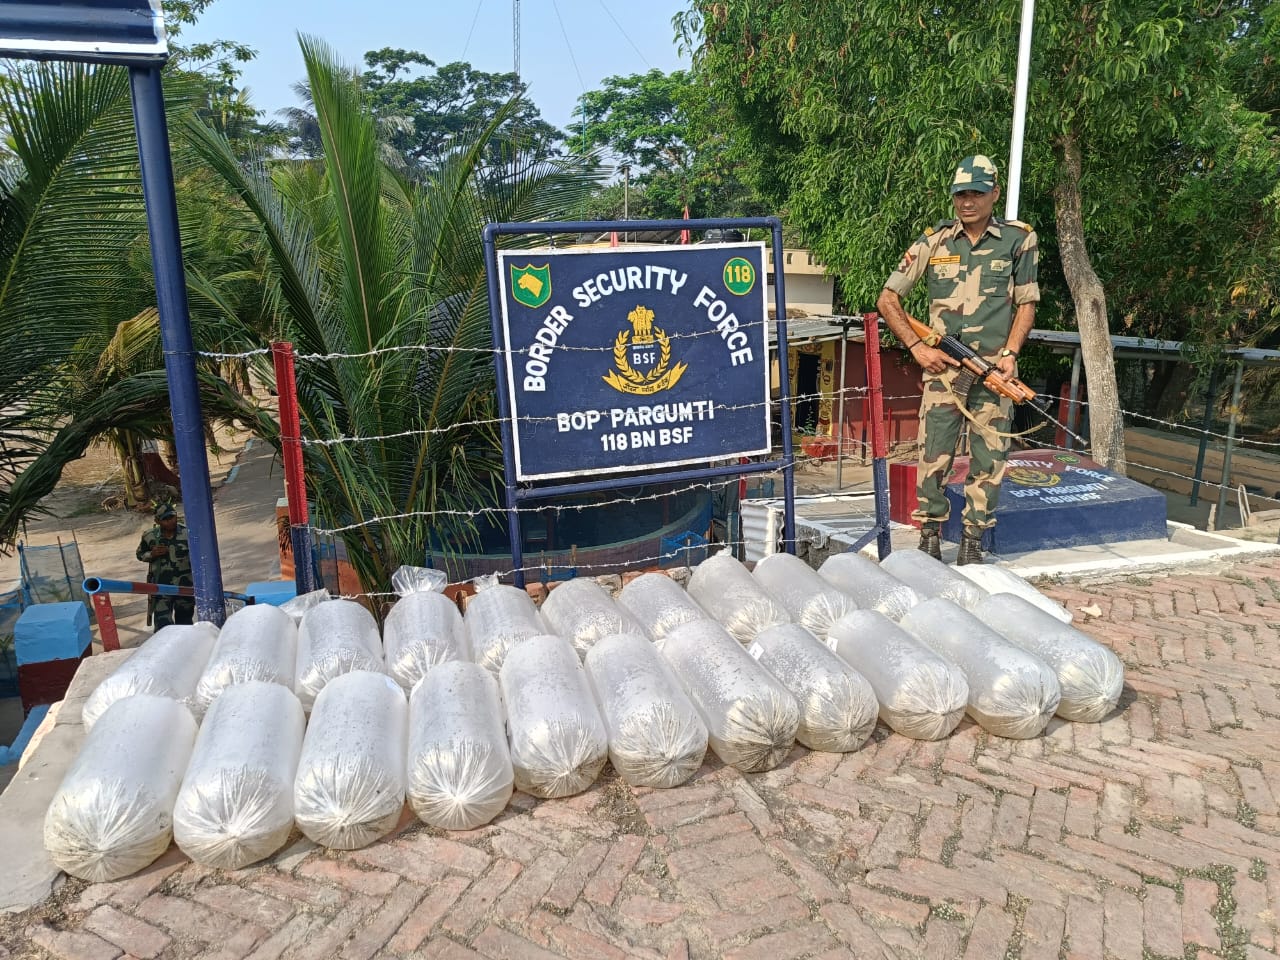 BSF, SOUTH BENGAL FRONTIER FOILS SMUGGLING ATTEMPTS, SEIZES FISHPIN BALLS, PHENSEDYL WORTH RS 12 LAKH ON INDIA-BANGLADESH BORDER.